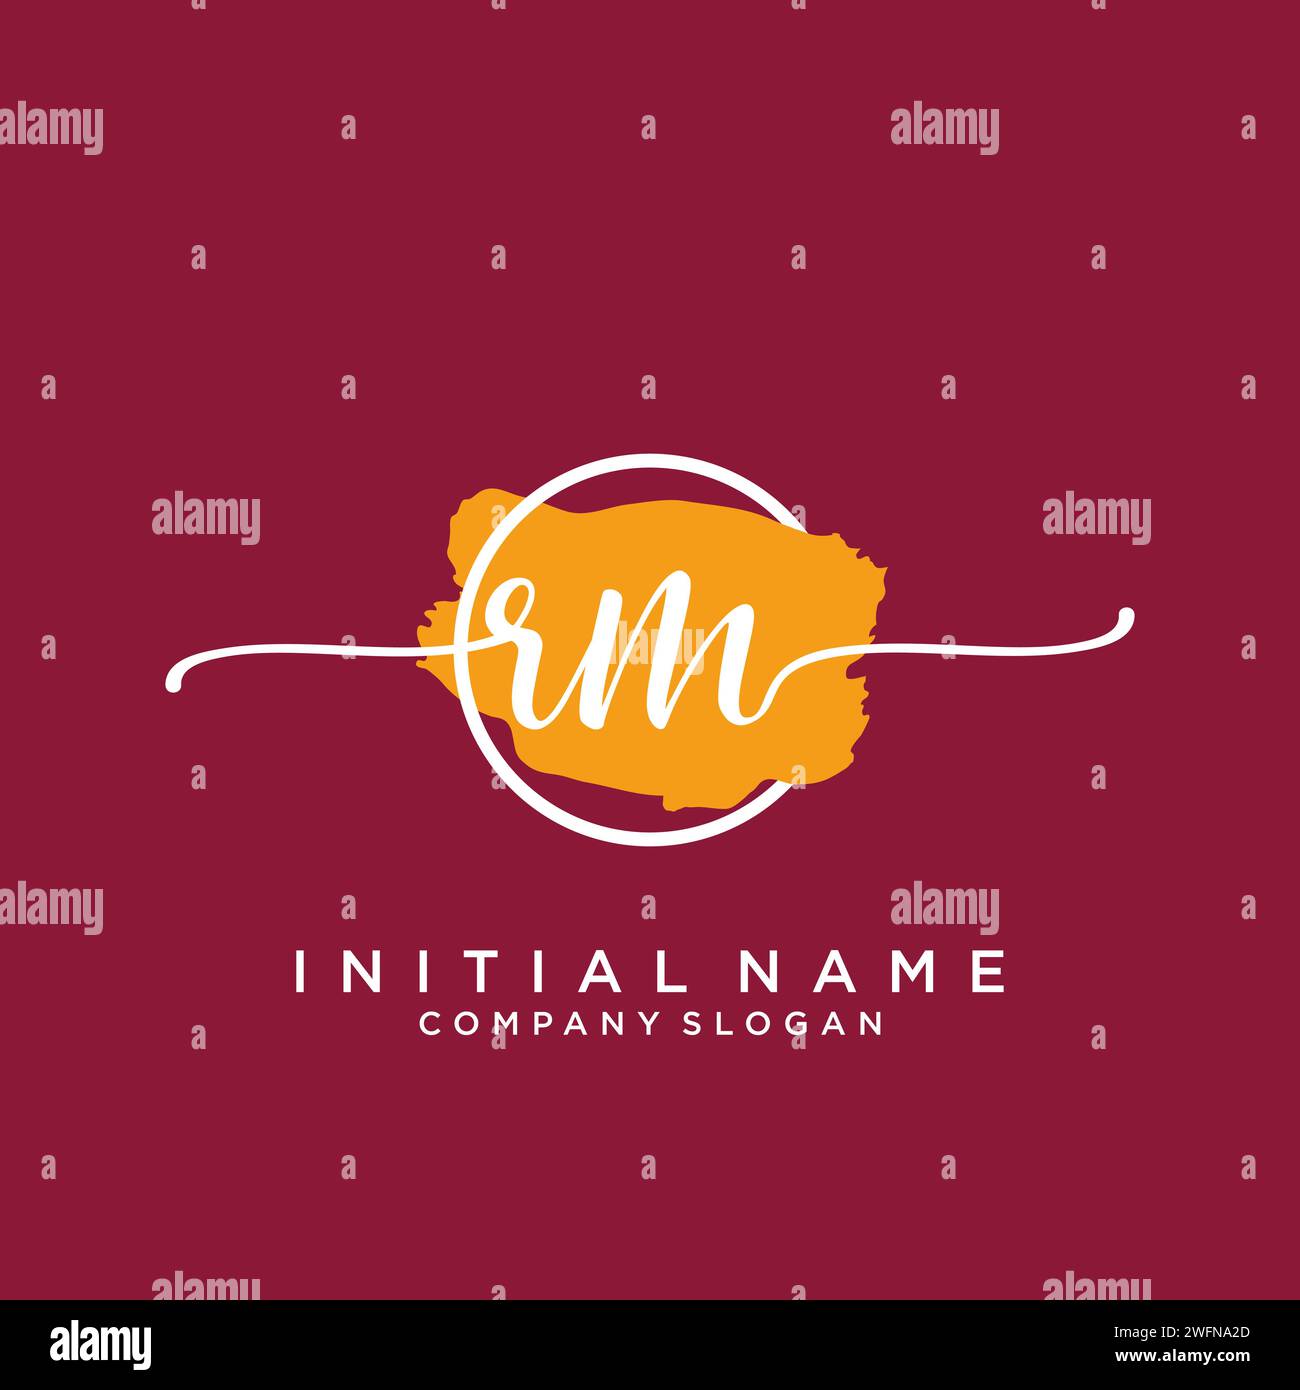 RM Initial handwriting logo with circle Stock Vector